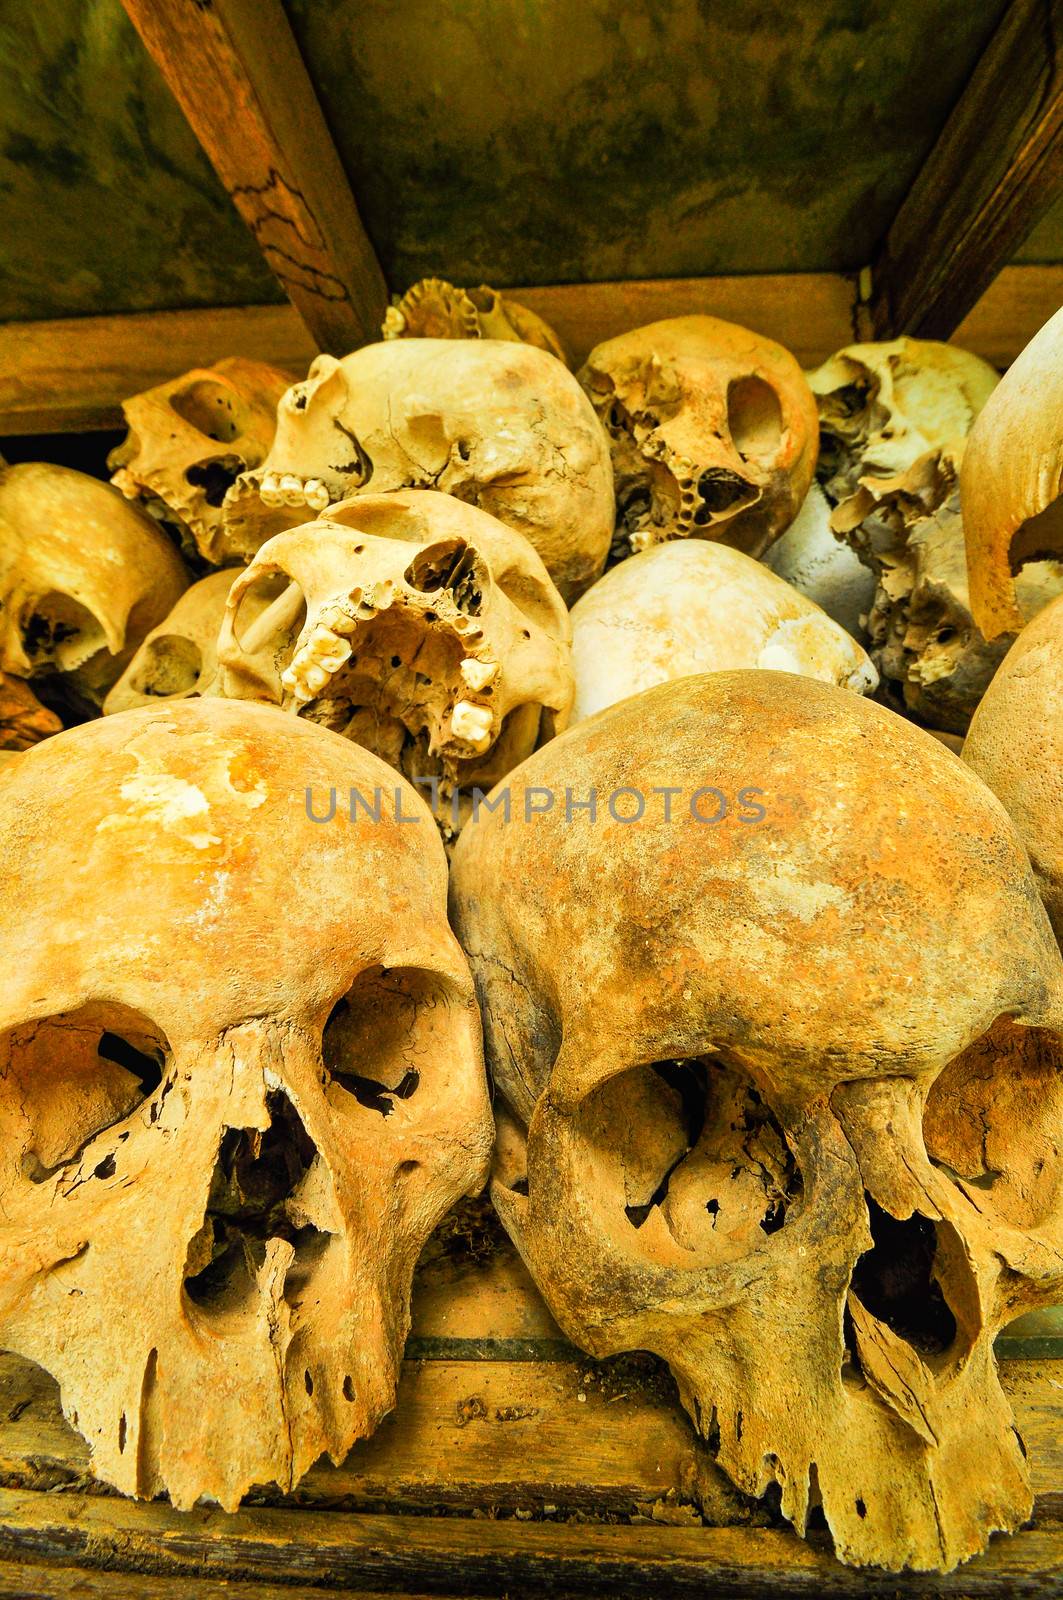 Skulls from the Killing Fields in Cambodia, this happened from a by weltreisendertj